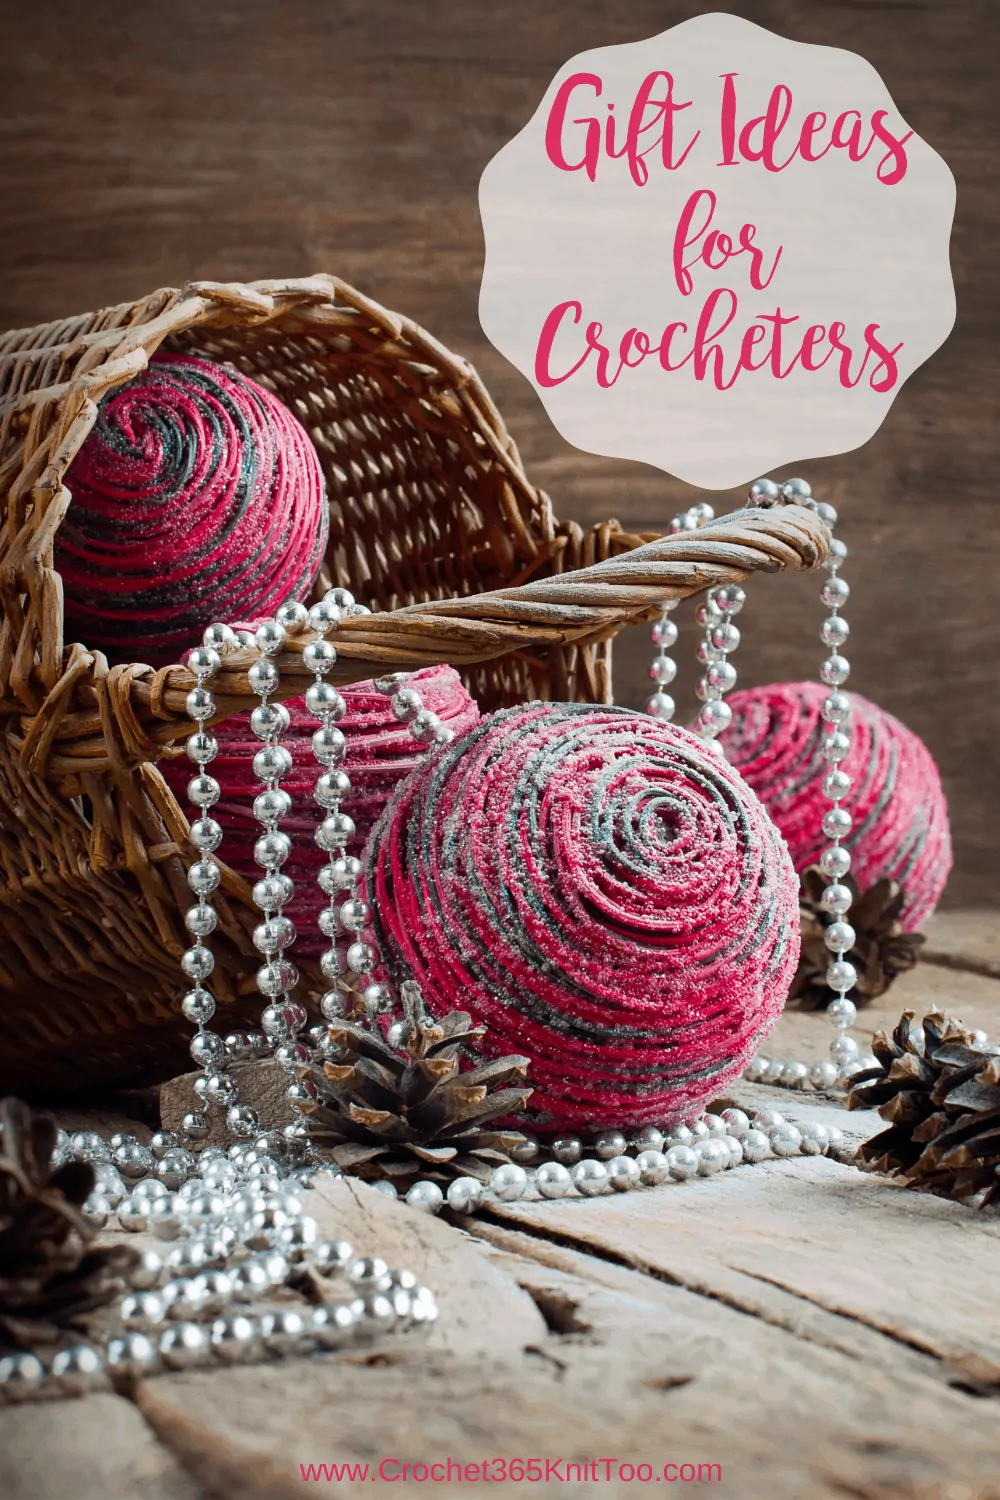 20+ fabulous gifts for crocheters 2024 - Gathered